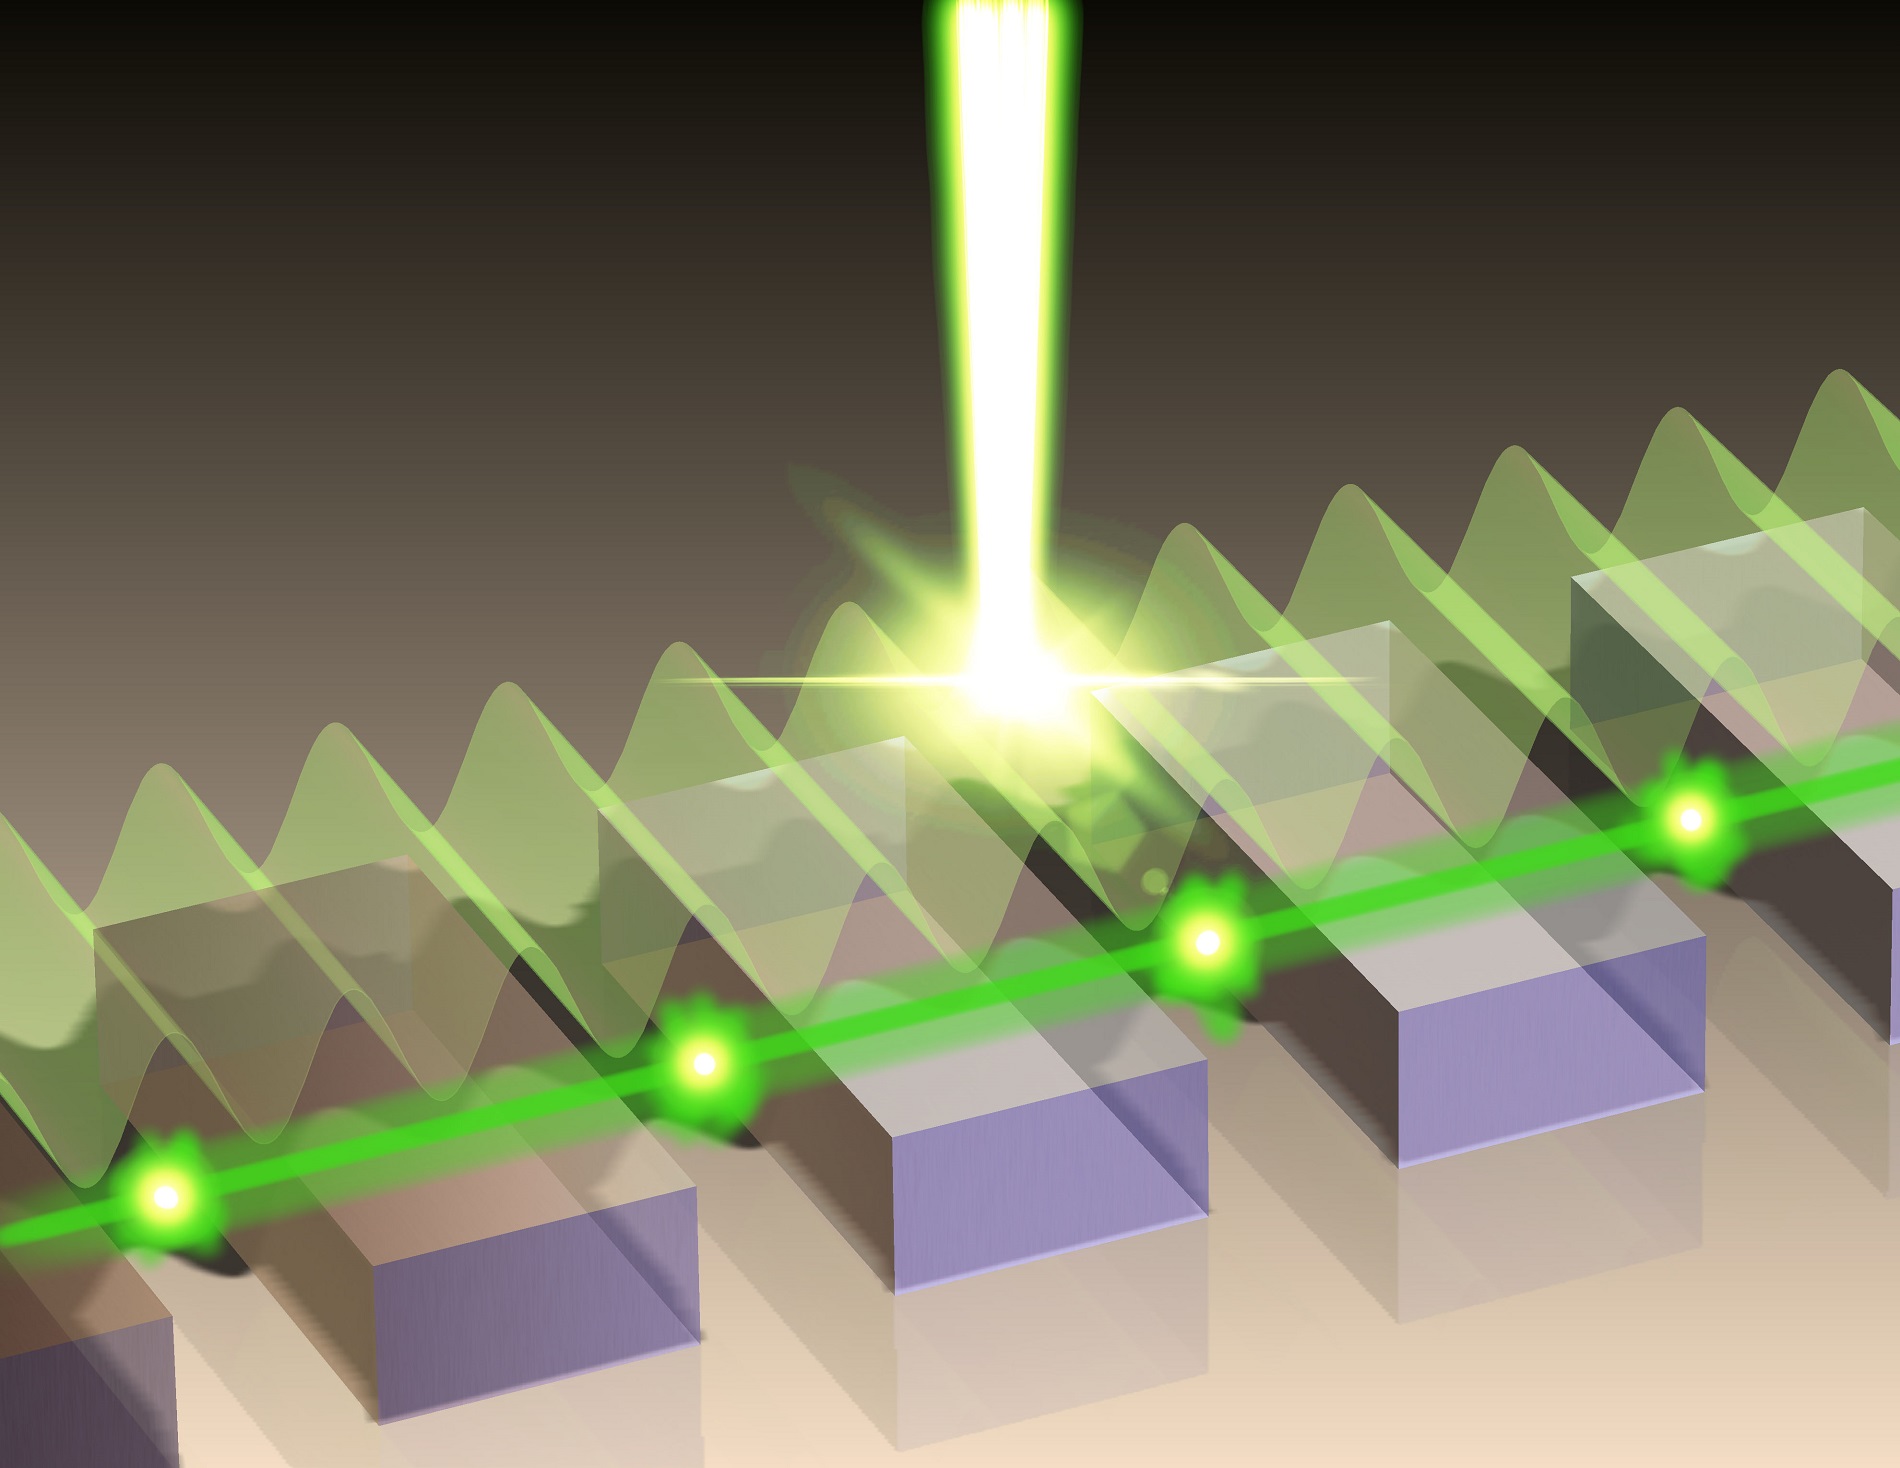 A phase-locking scheme for plasmonic lasers is developed in which traveling surface-waves longitudinally couple several metallic microcavities in a surface-emitting laser array